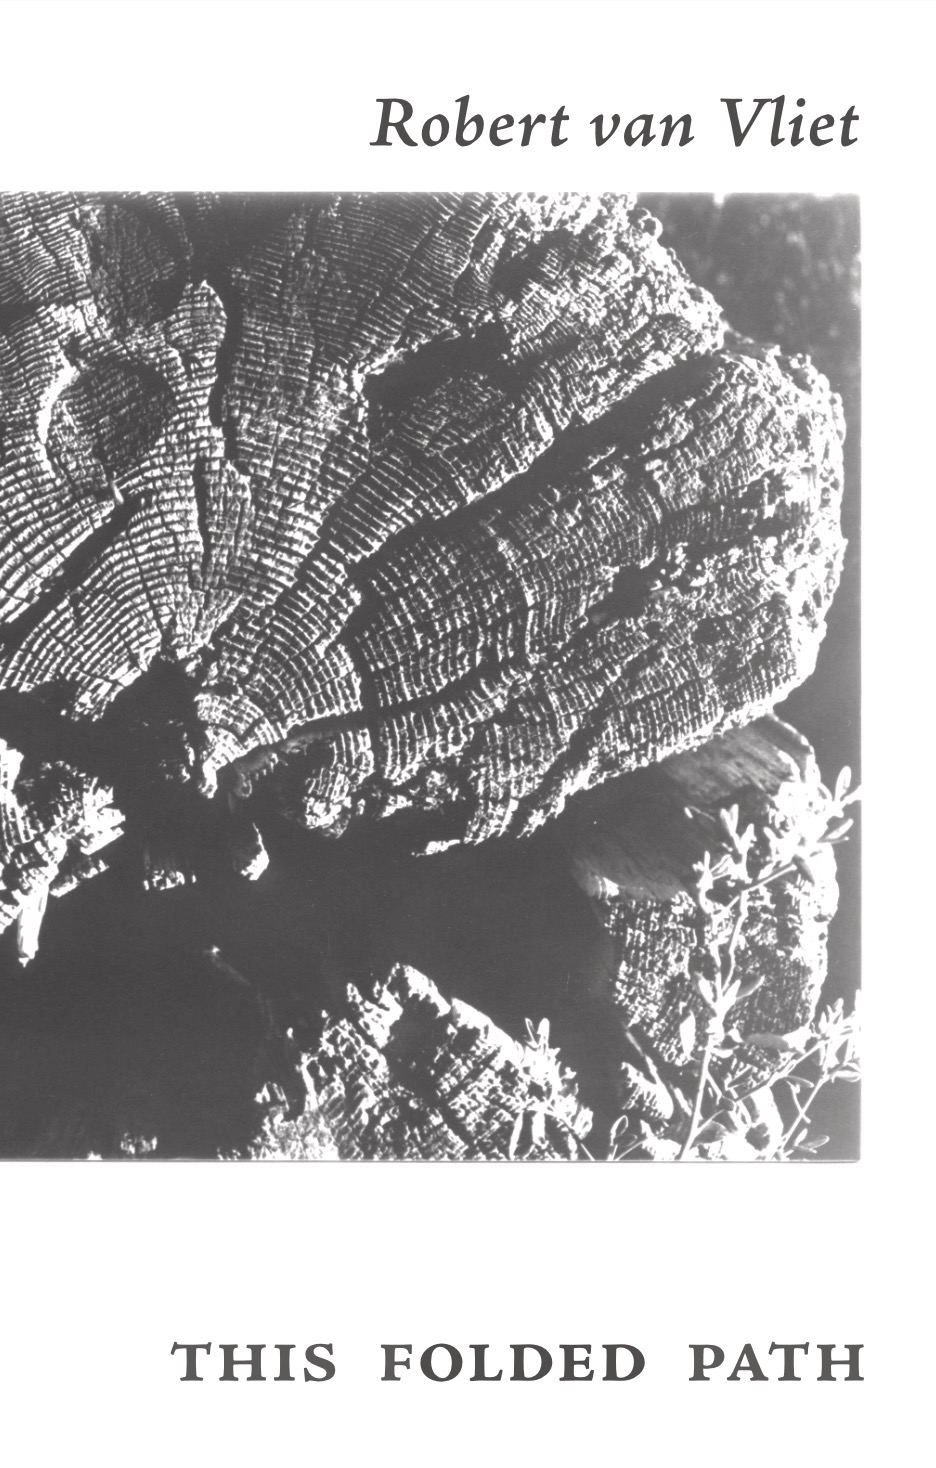 a black and white photo of a fallen log, showing its rings; with my name above the image and the title below